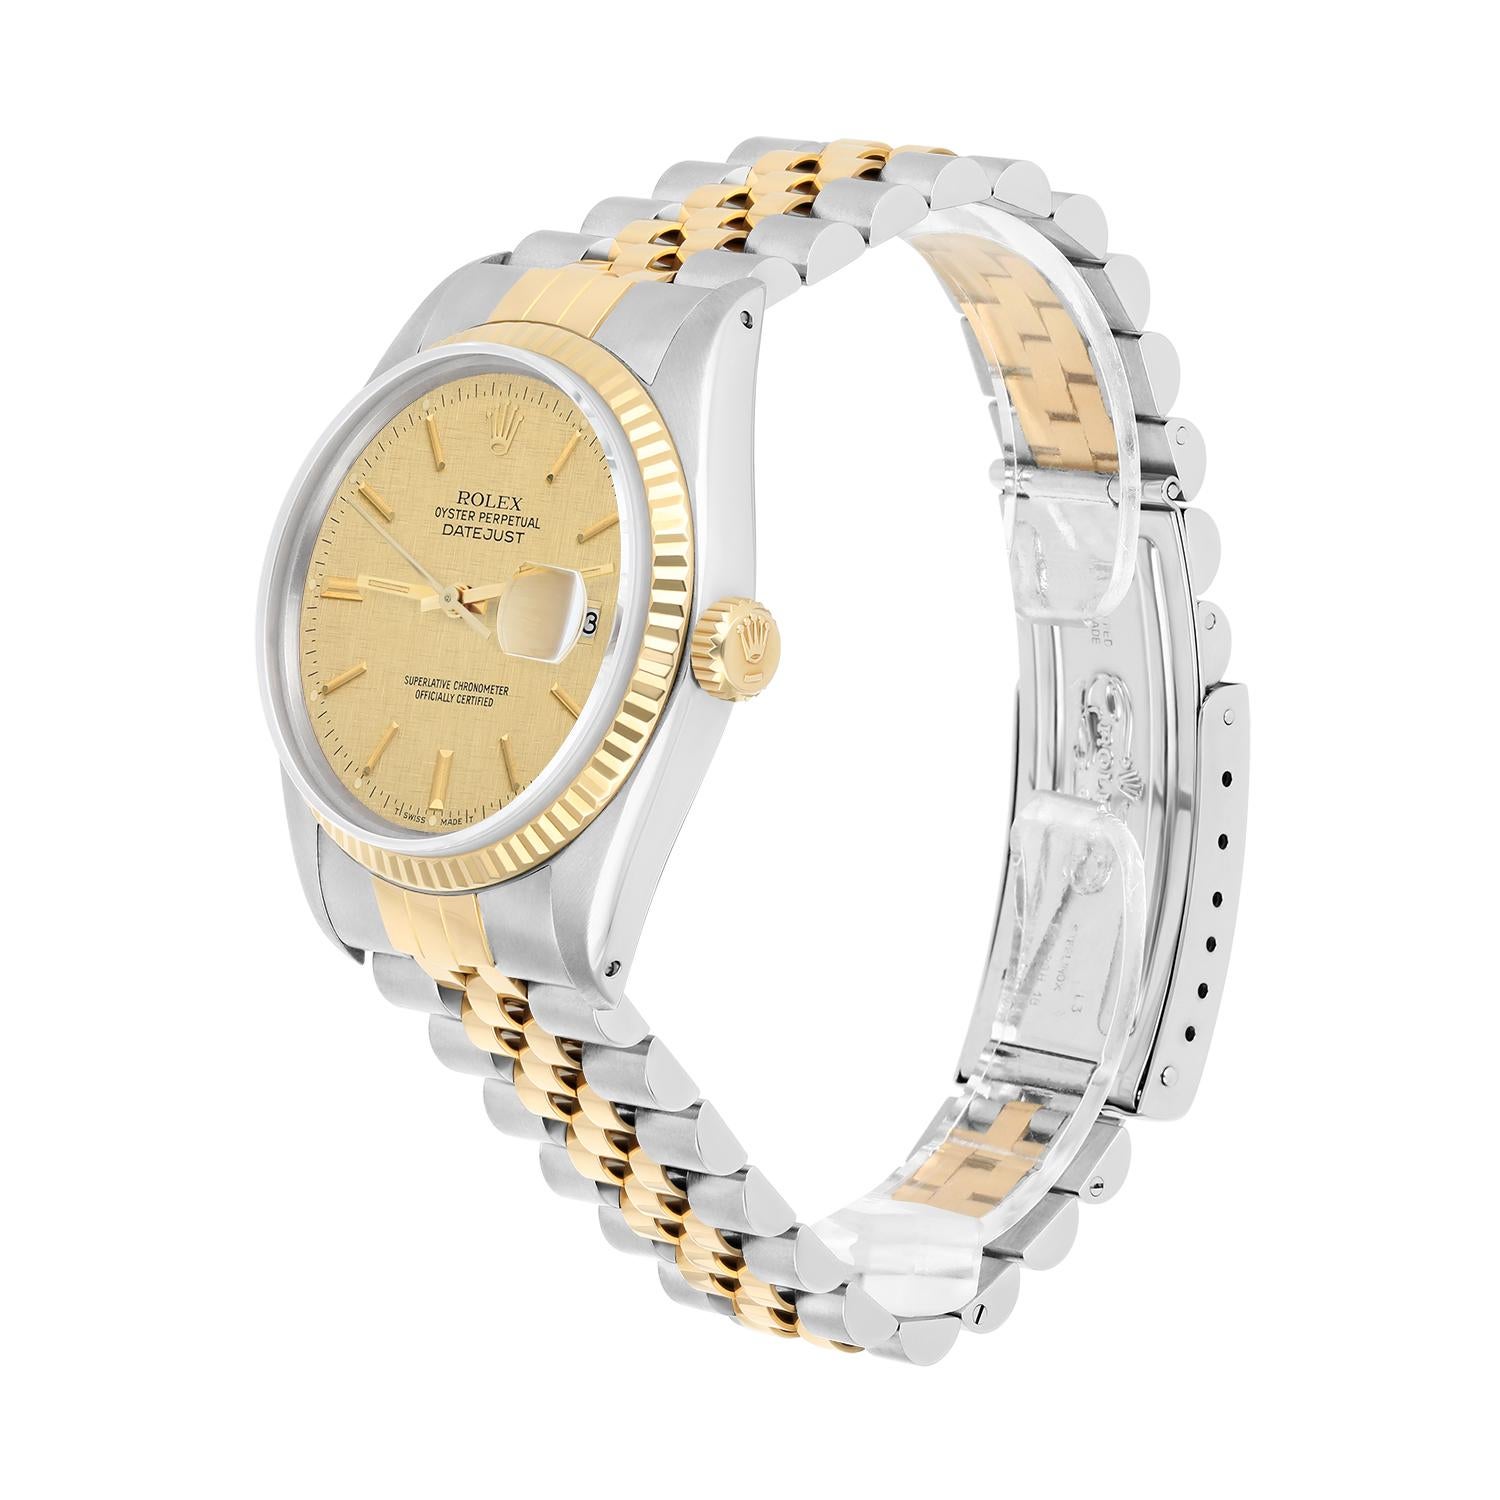 Rolex Datejust 36mm Two Tone Champagne Linen Dial Jubilee 16013 Circa 1979 For Sale 1